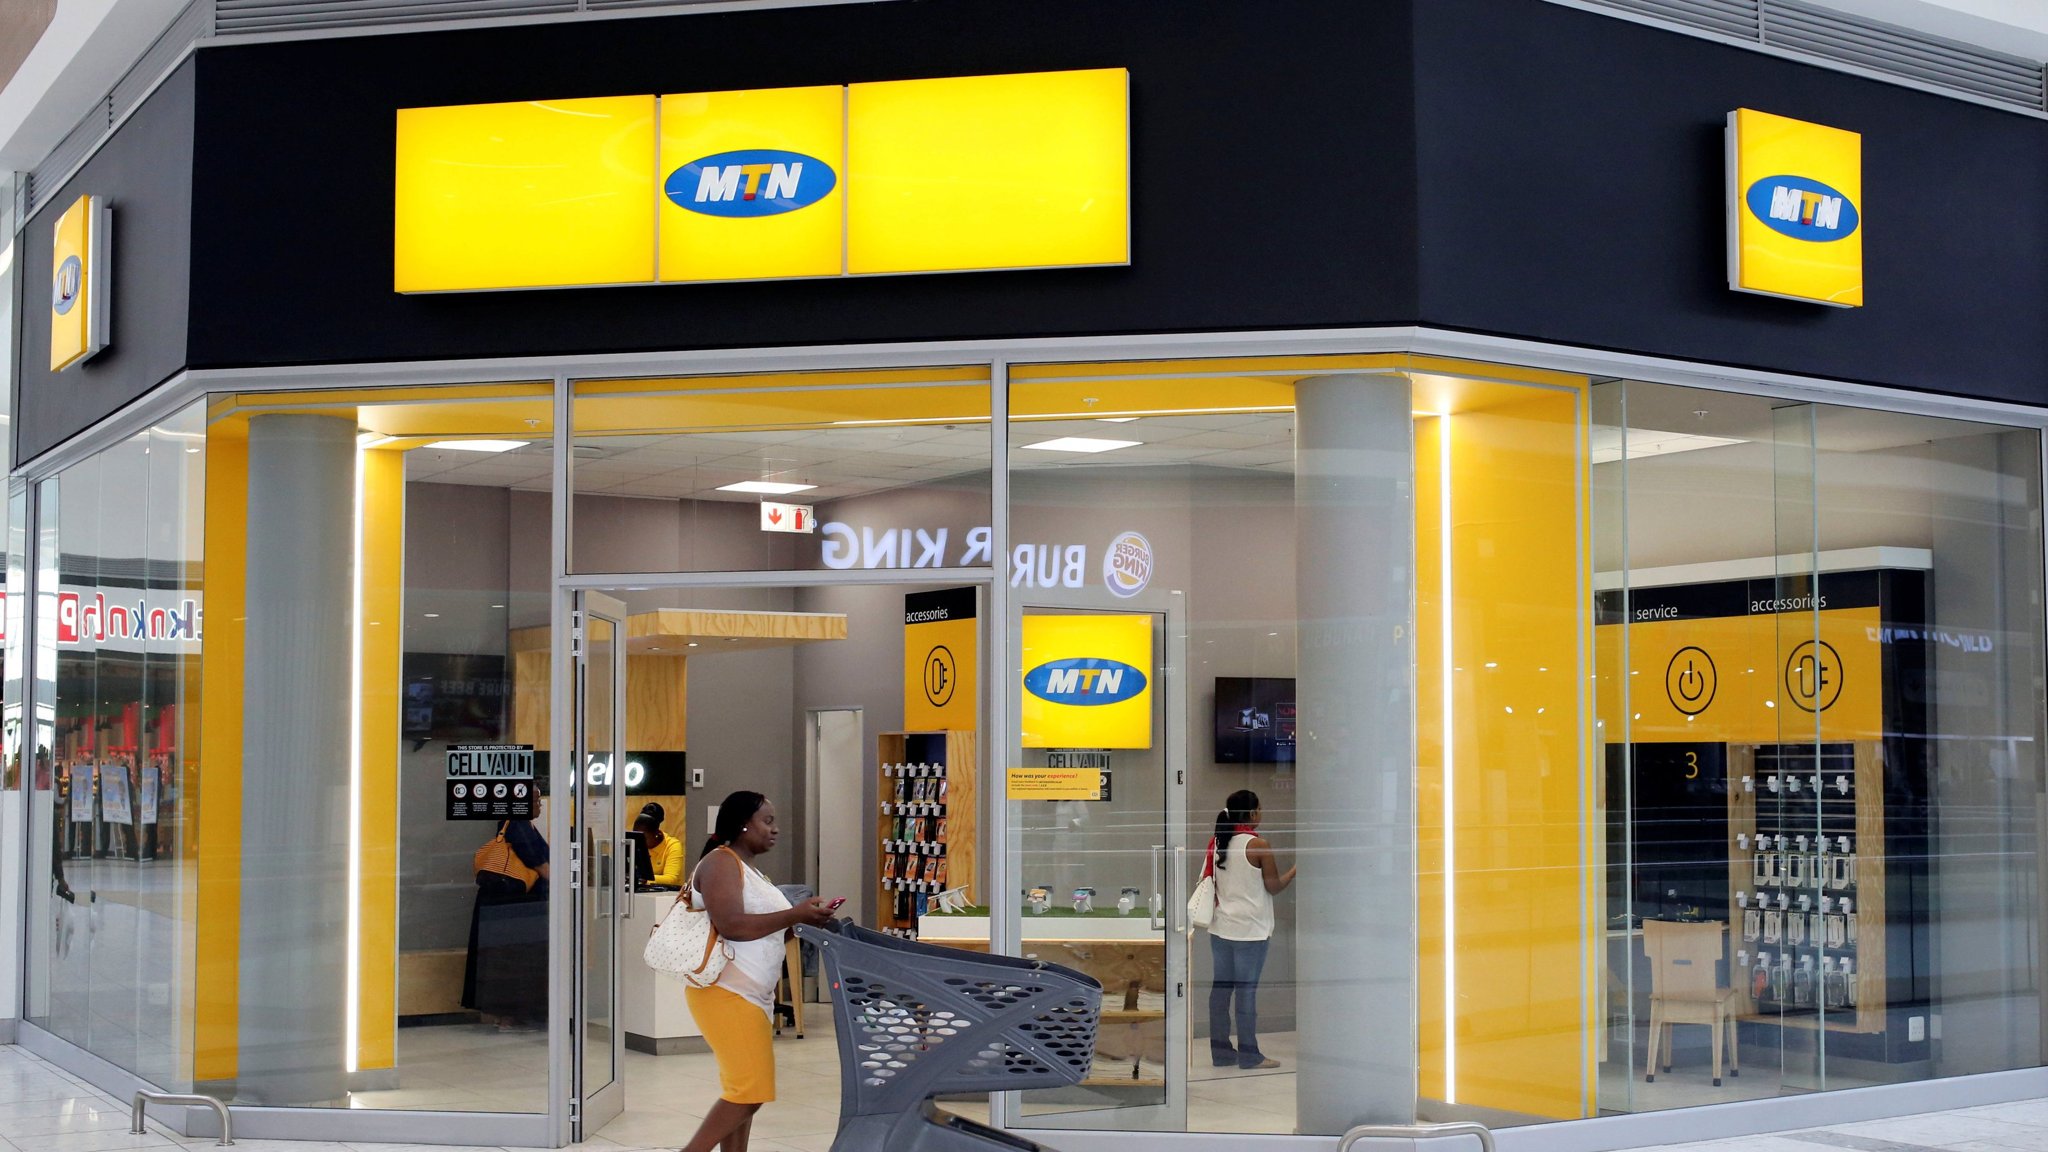  Telecommunications: Lagos Tax Appeal Court orders MTN Nigeria to settle $72.5M in tax arrears 